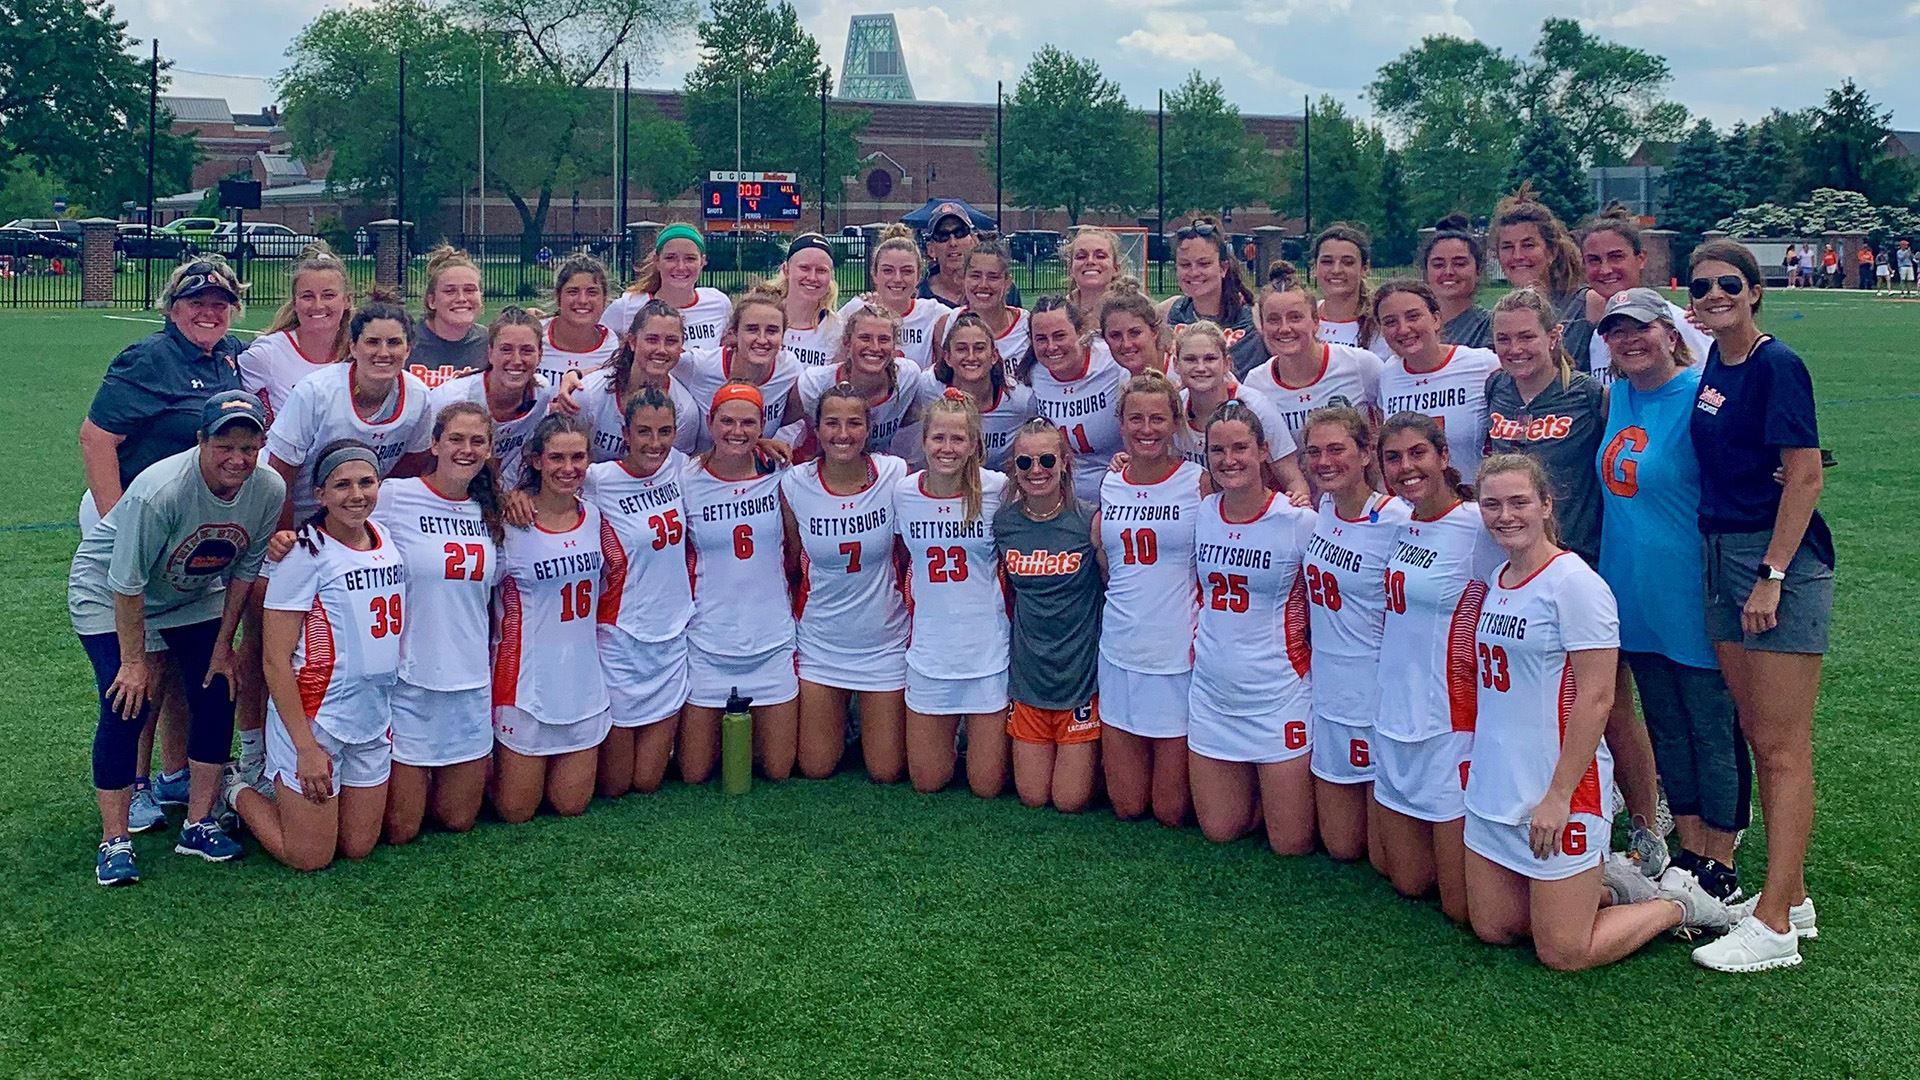 Gettysburg Marches on to Final Four; F&M Falls to Tufts